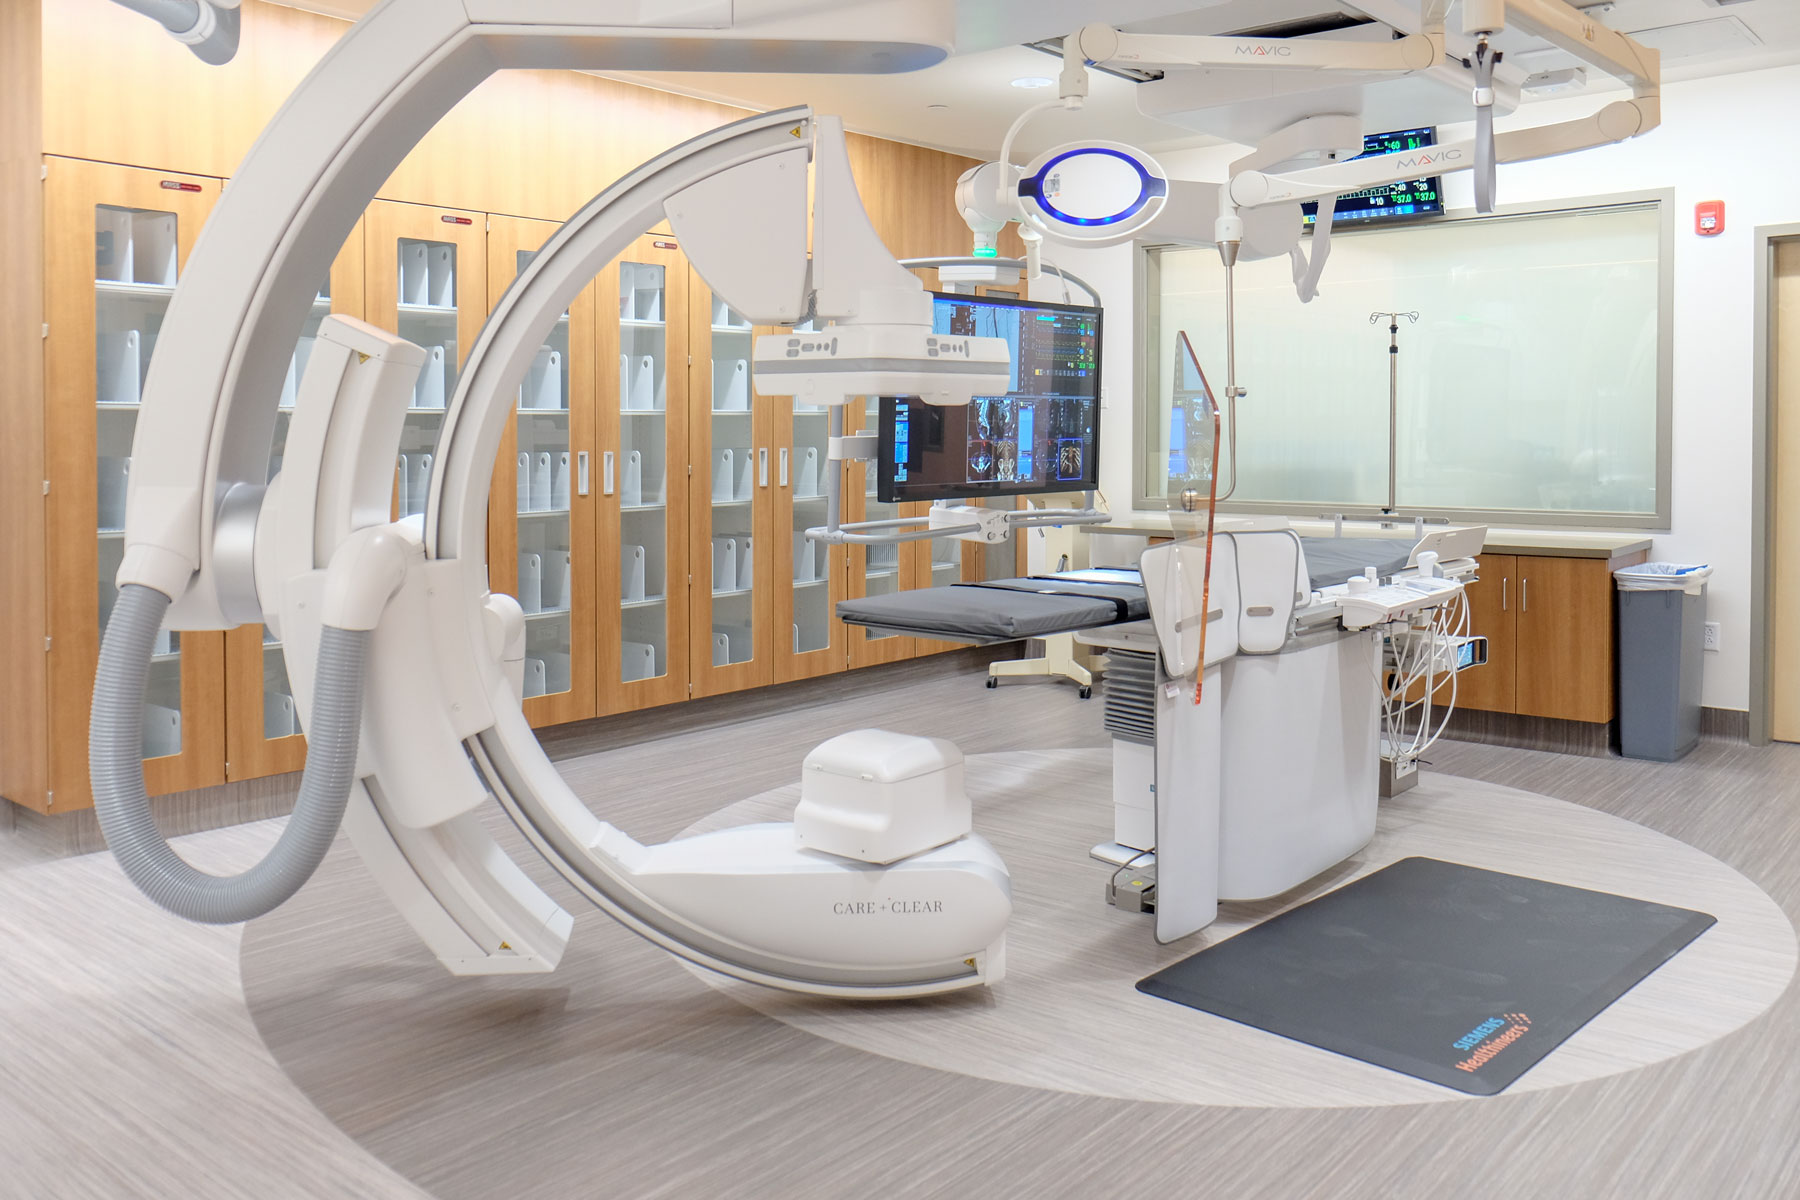 INTERMOUNTAIN MEDICAL CENTER HYBRID OPERATING ROOM. Human-centered design with a focus on creating a space that is best for the doctors. Plenty of storage along far wall with glass doors so that everything is easily found.